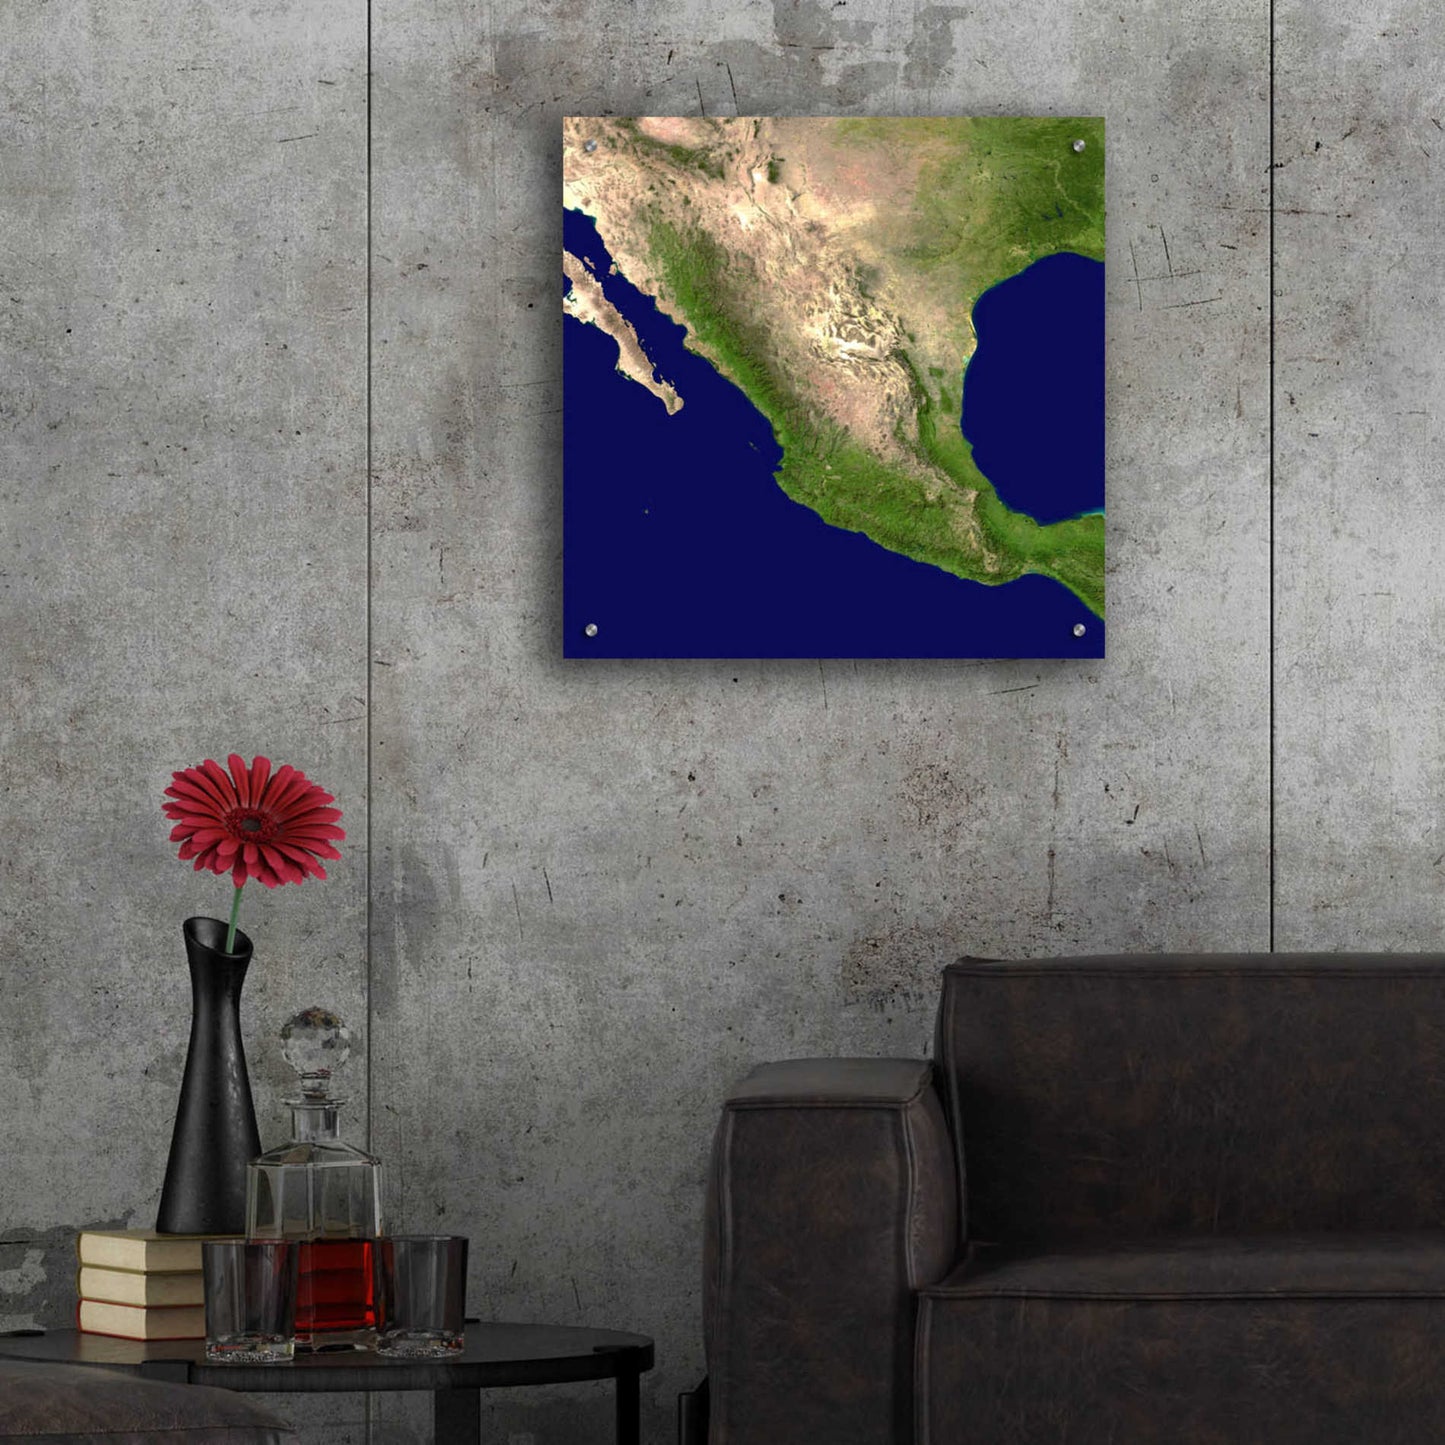 Epic Art 'Earth as Art: Mexico and Central America' Acrylic Glass Wall Art,24x24